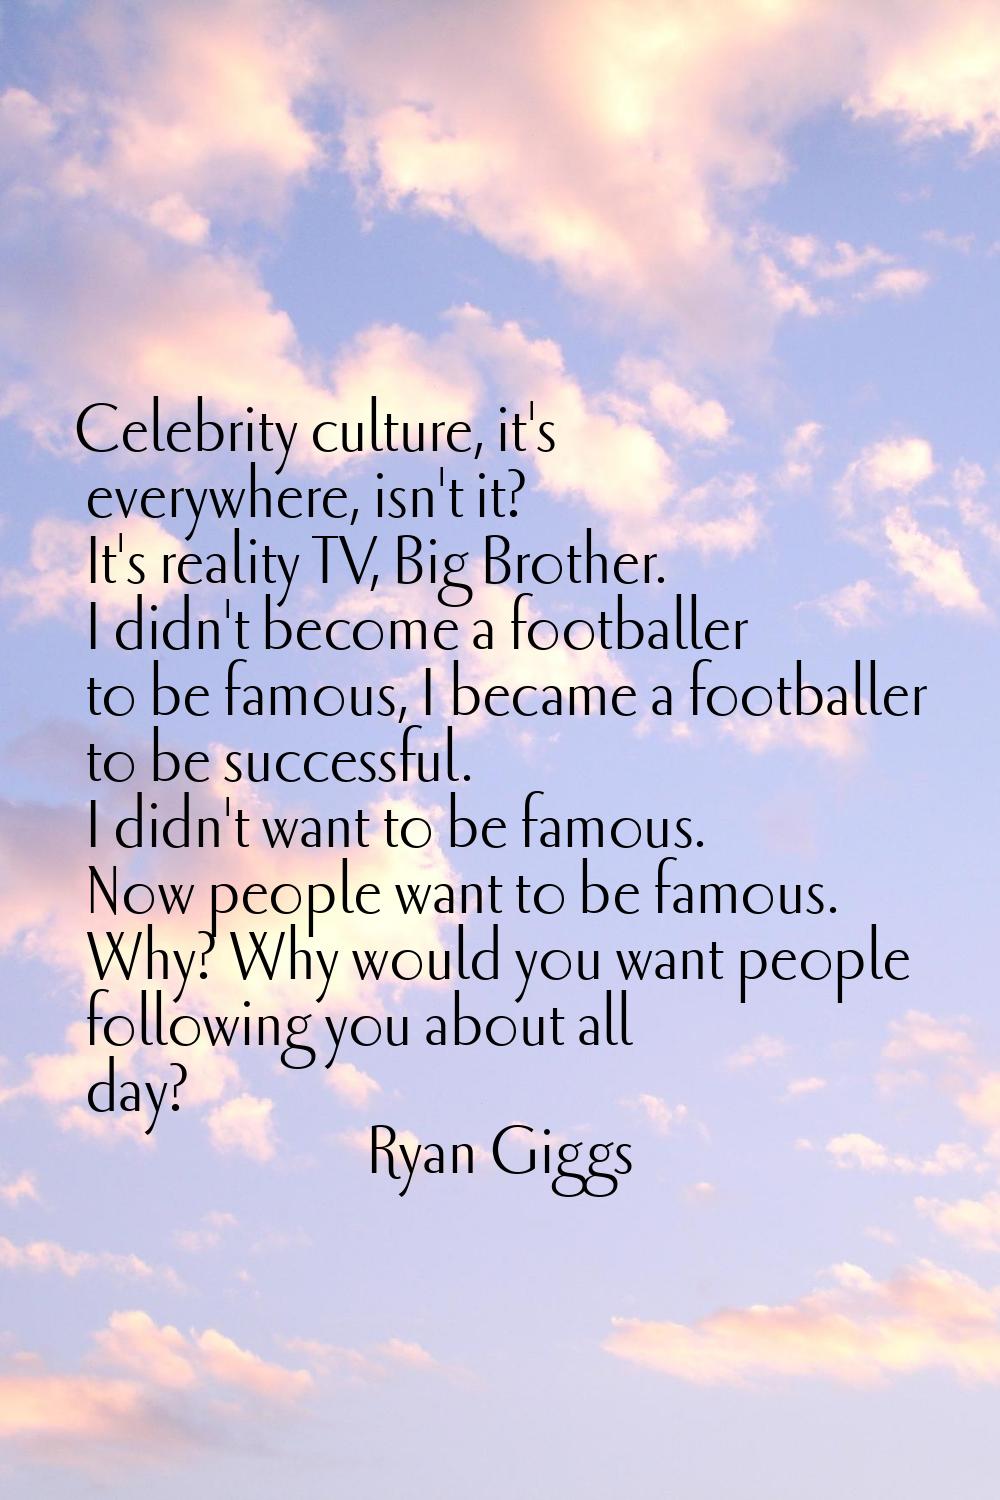 Celebrity culture, it's everywhere, isn't it? It's reality TV, Big Brother. I didn't become a footb